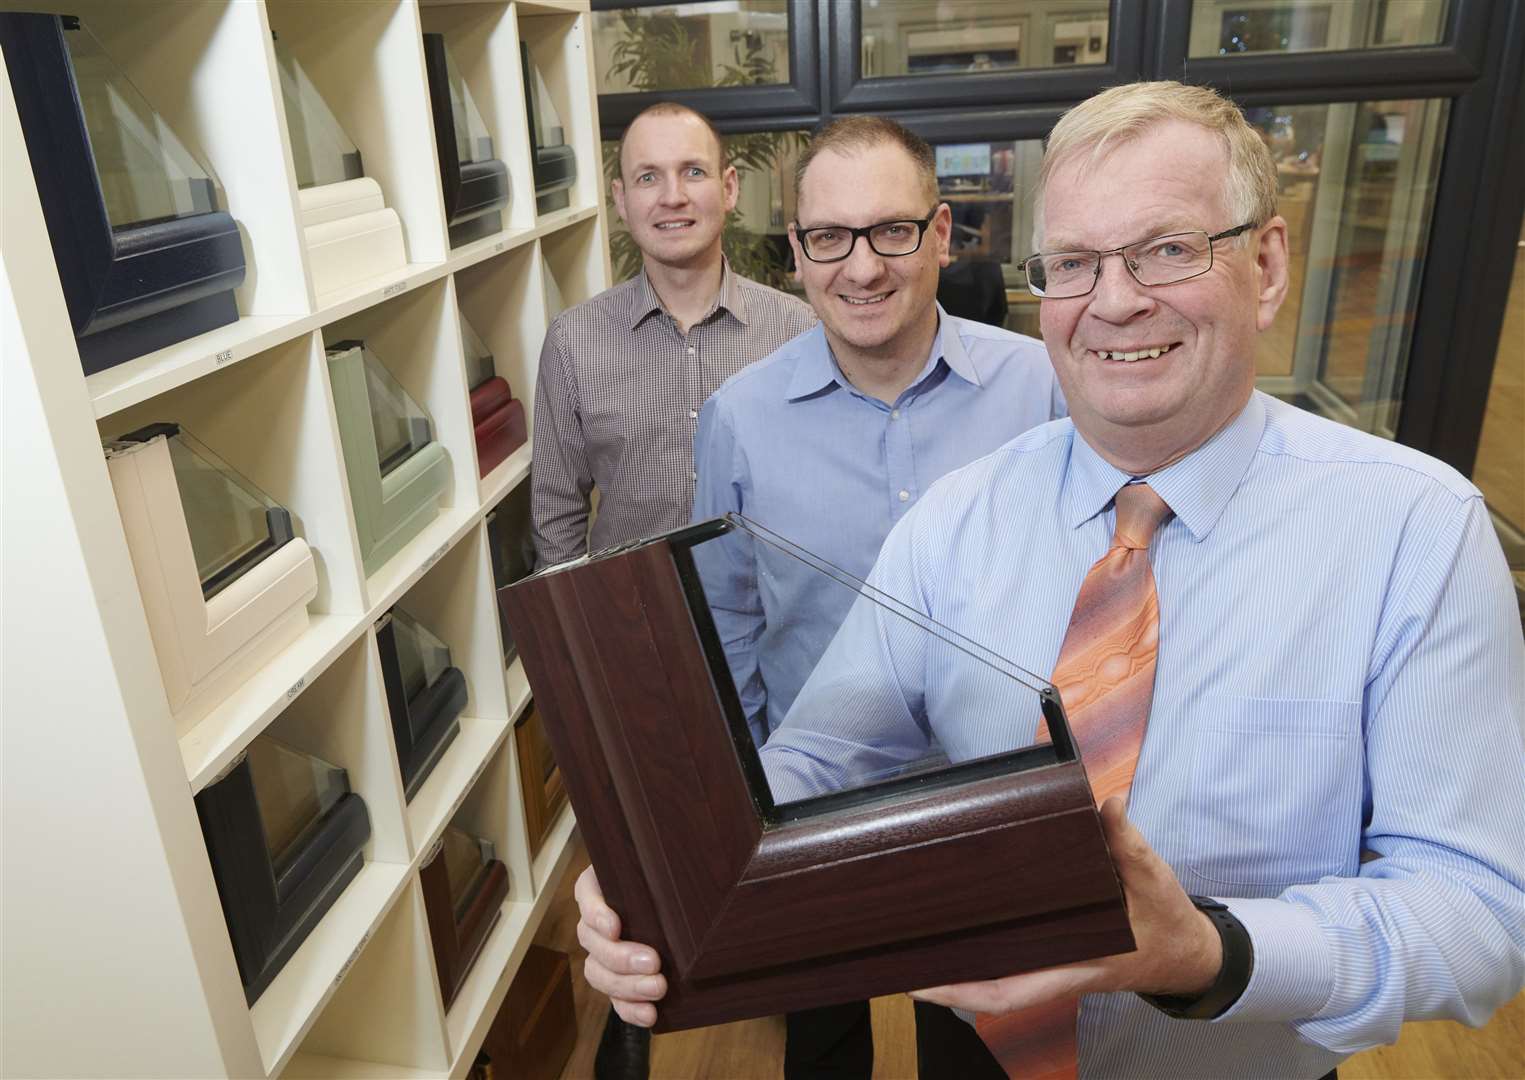 David Dowling (right) handed over the reins to his sons Scott (left) and Chris in 2020, but still works for the firm as group chairman, consulting for the company on a part-time basis.